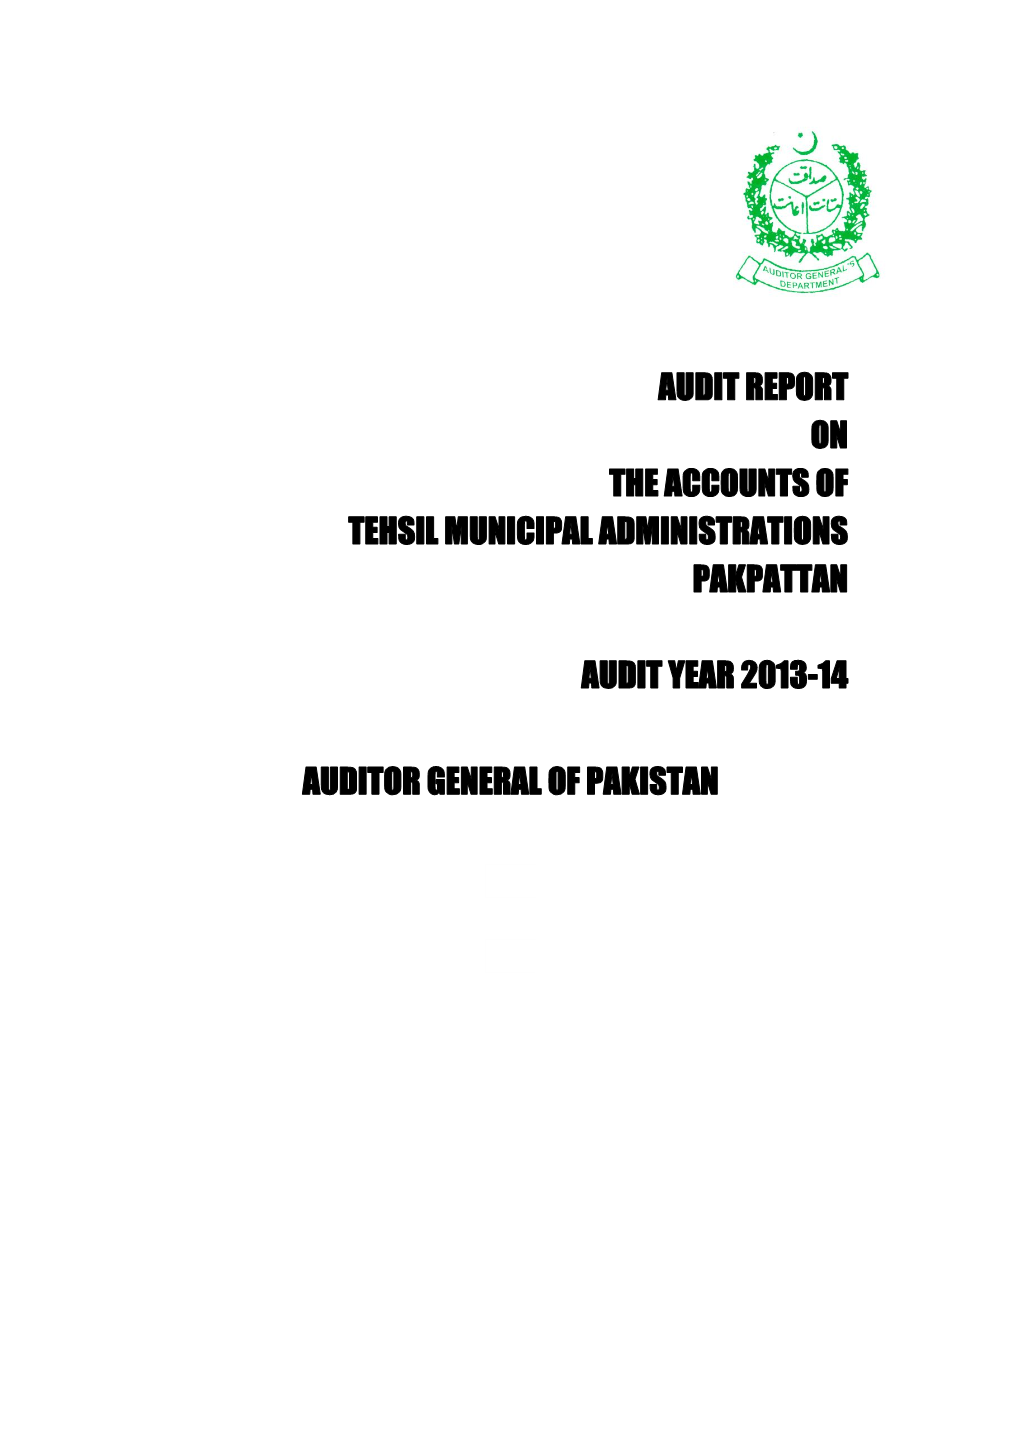 Audit Report on the Accounts of Tehsil Municipal Administrations Pakpattan